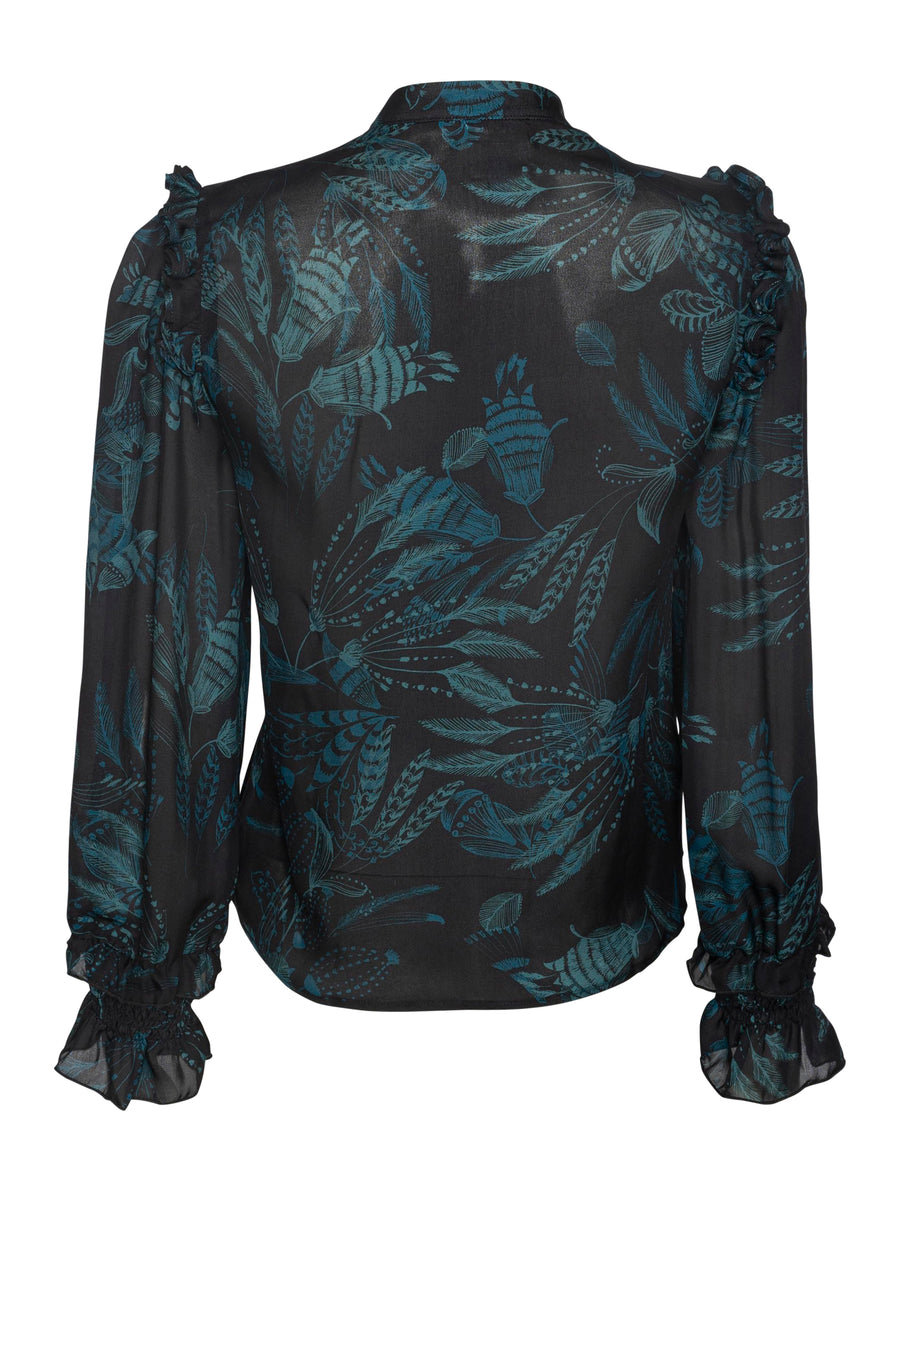 Cosette Blouse - FEATHERS Black Navy in Double Georgette